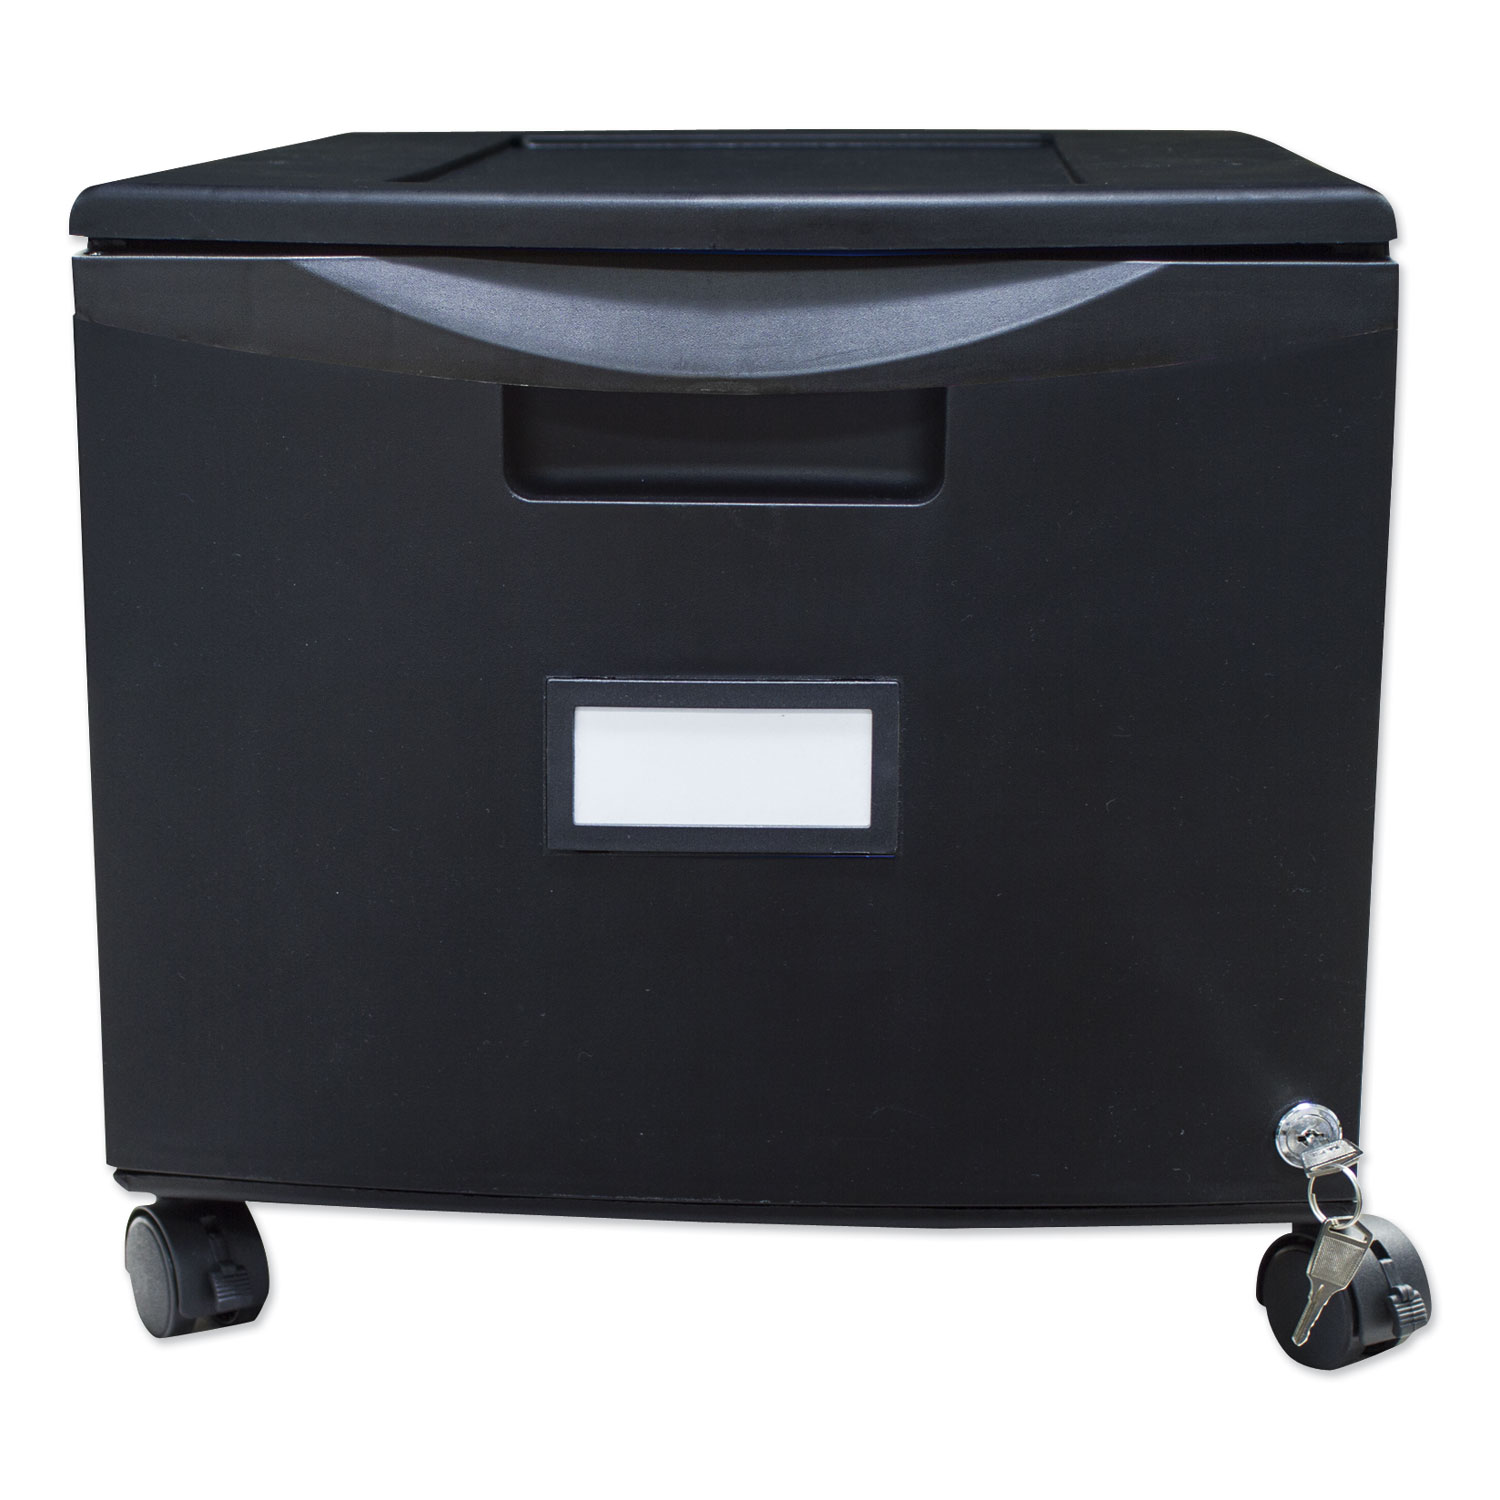 Single Drawer Mobile Filing Cabinet 14 75w X 18 25d X 12 75h